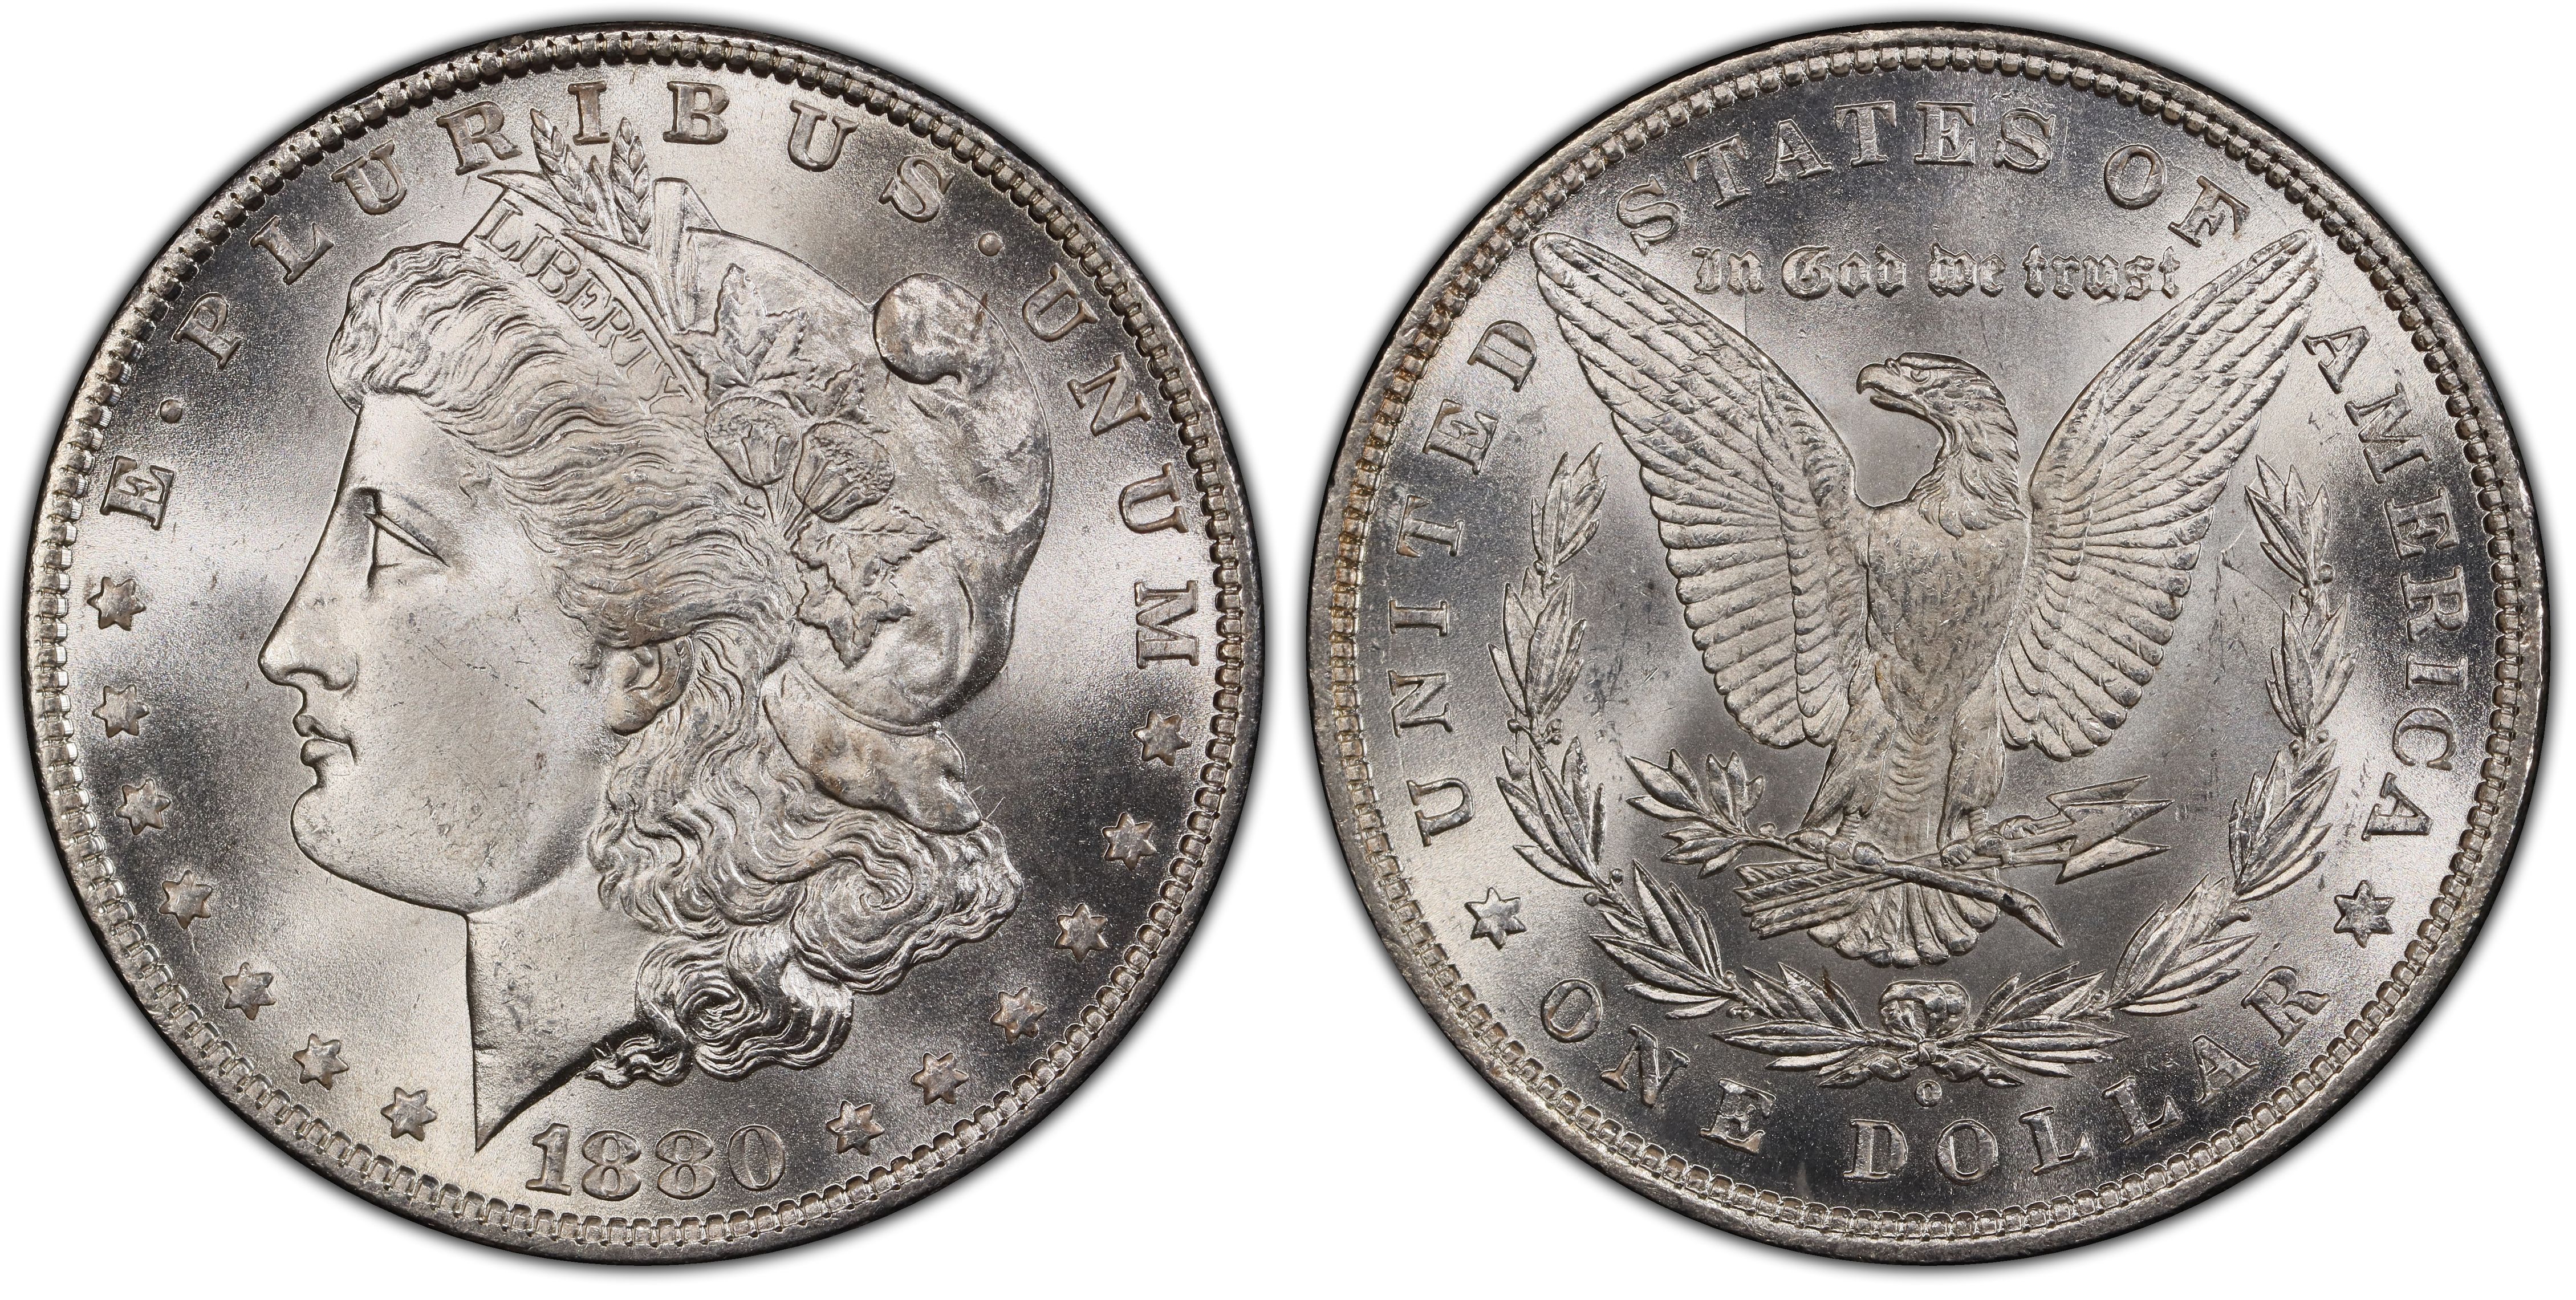 1880-O Morgan Silver Dollar (Extremely Fine to Almost Uncirculated